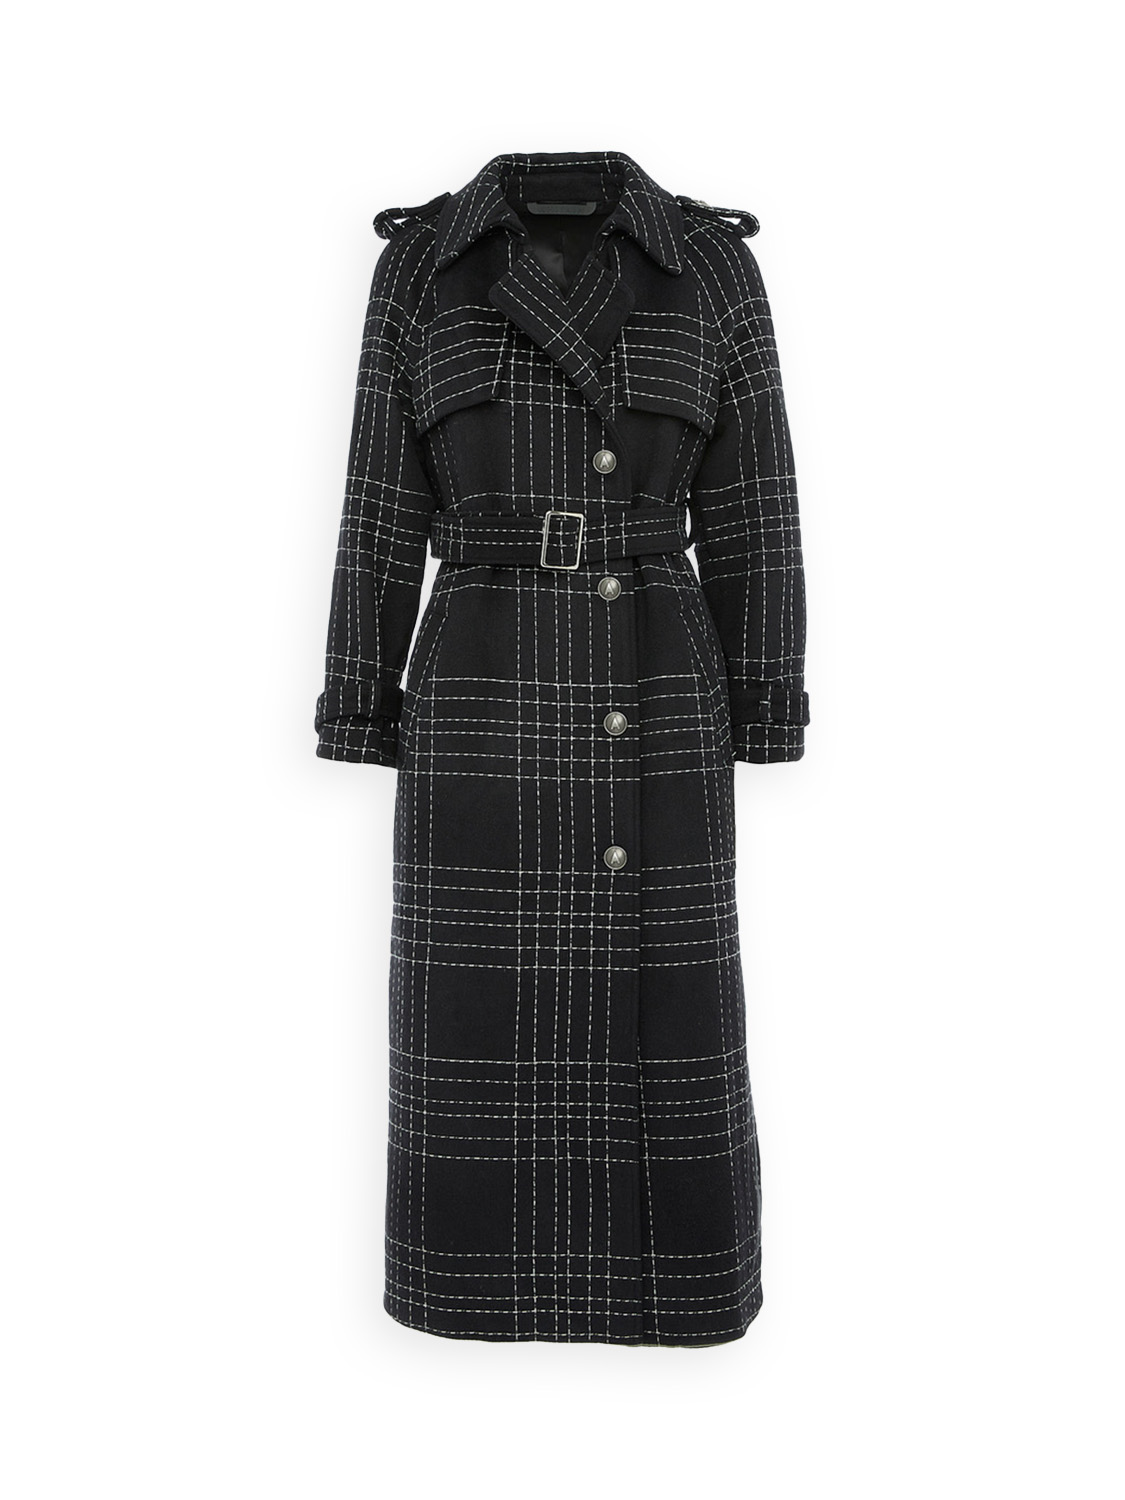 Plaid coat with tie belt made of wool